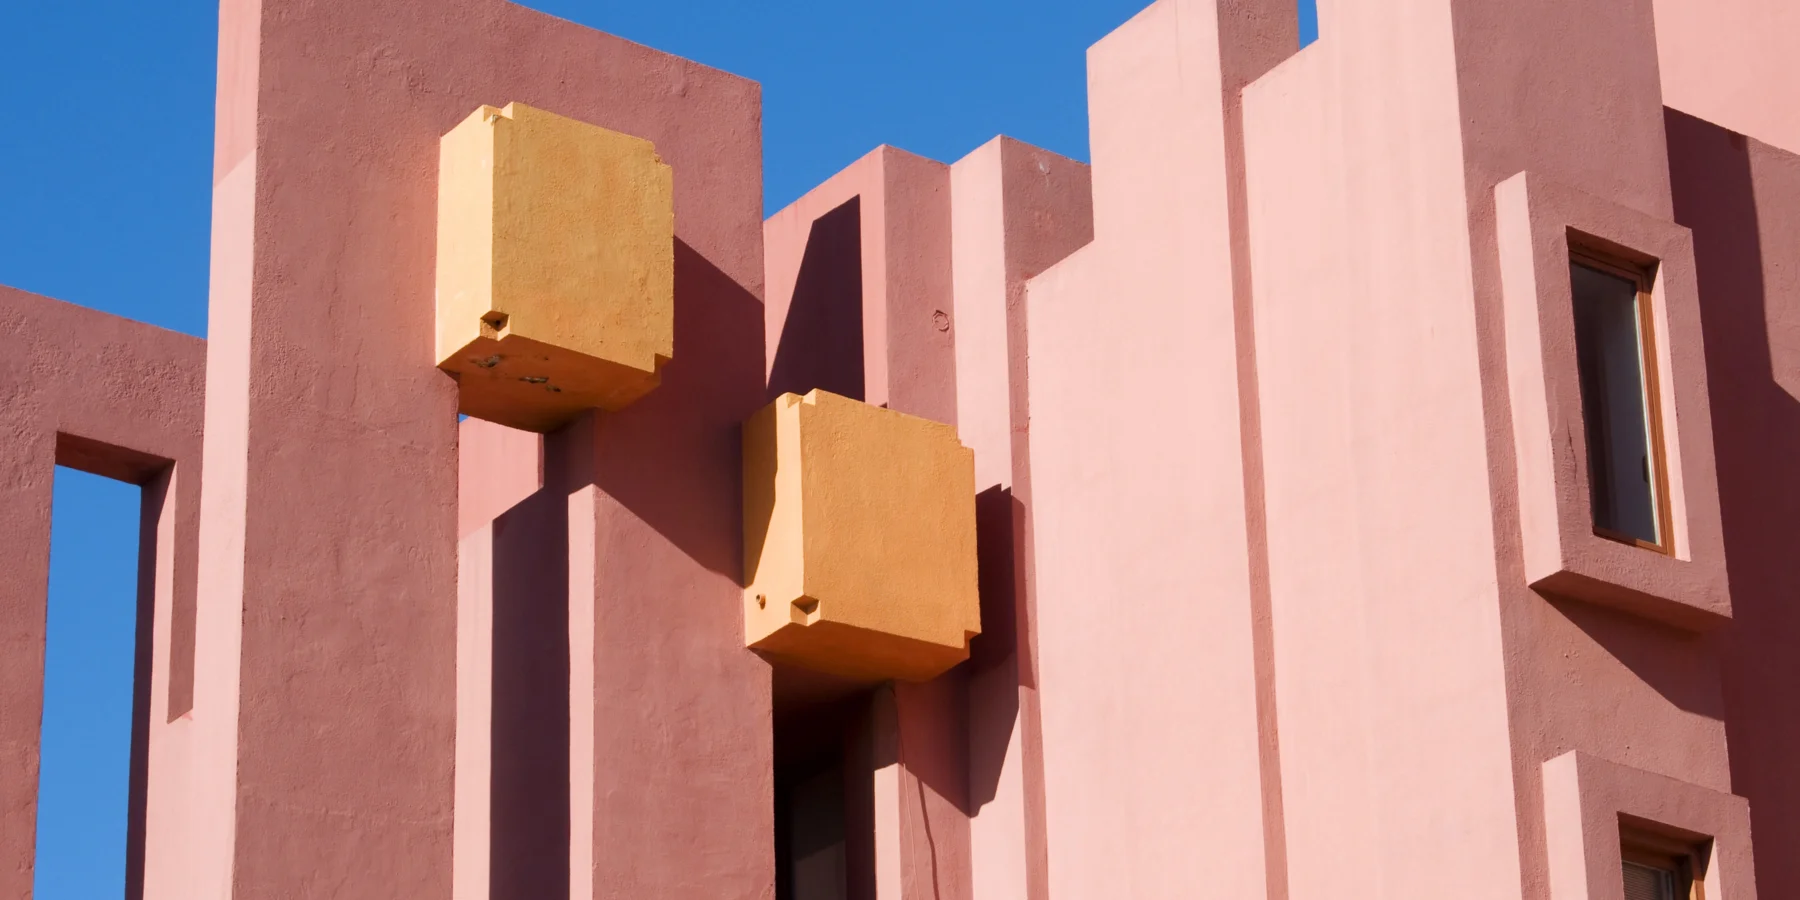 Image of the renowned and awarded building Muralla Roja, made by the architect Ricardo Bofill in Calpe